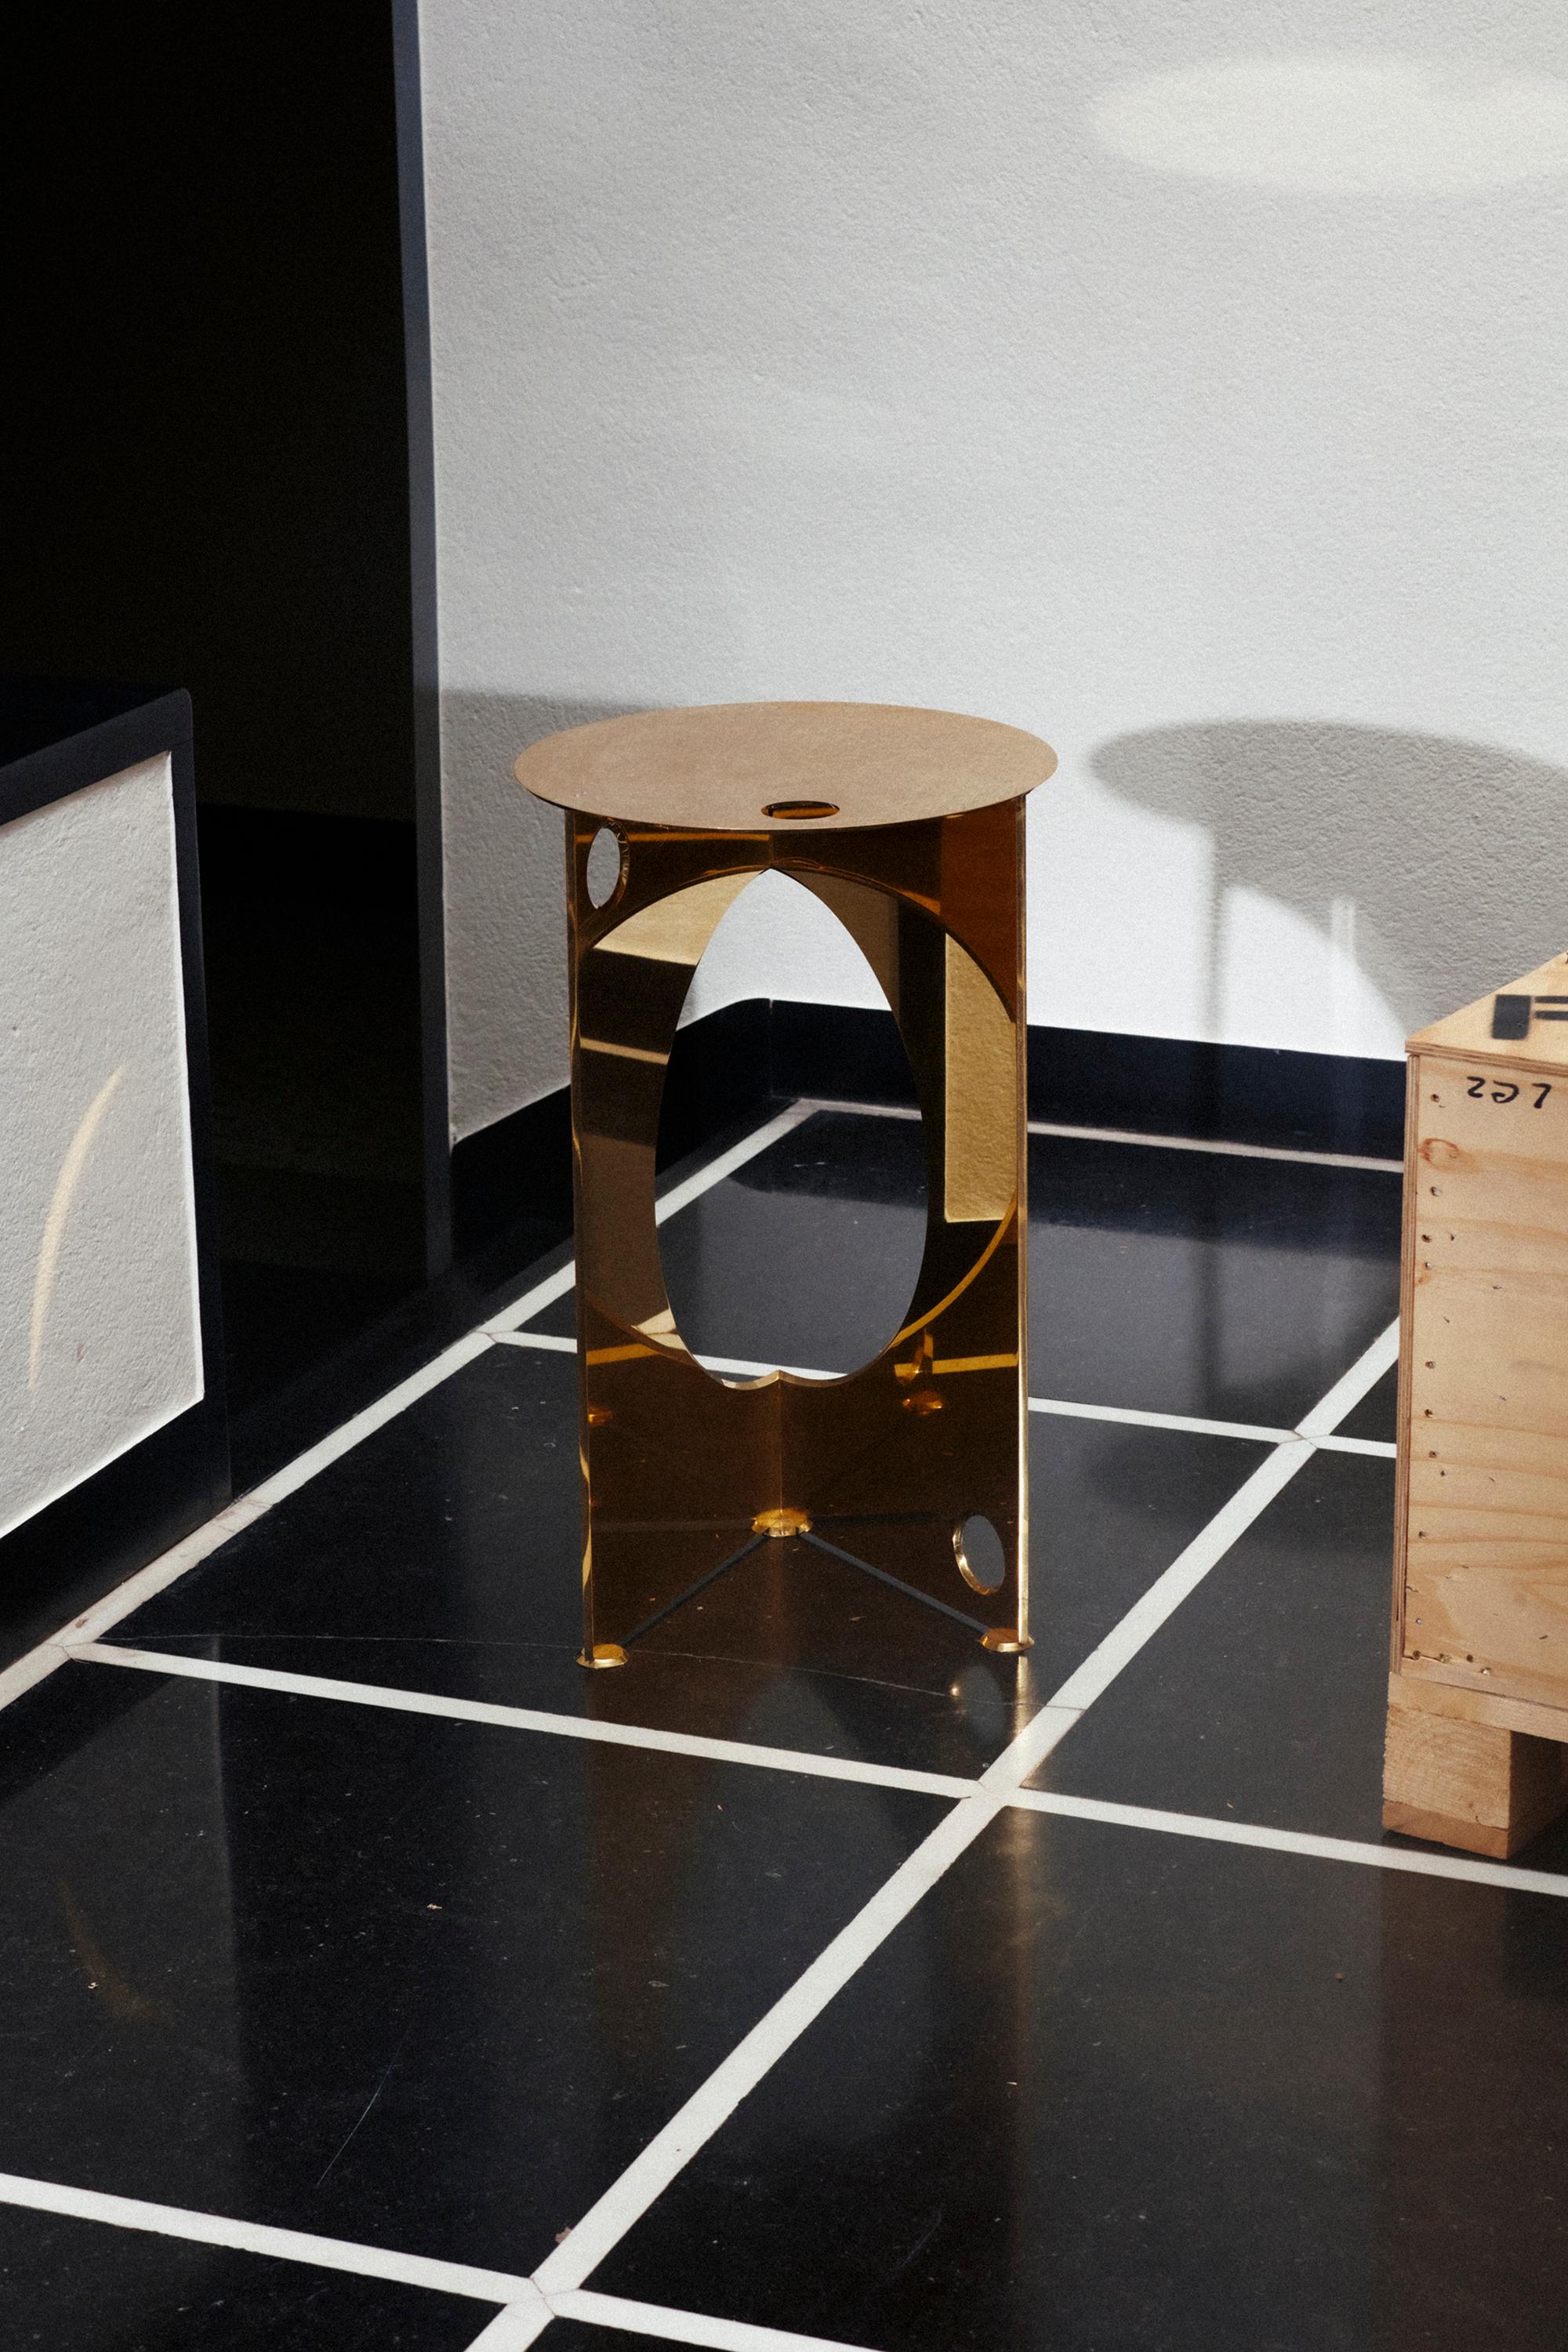 One side table, 2019 

Defying the ancient mathematical adage “you can’t square a circle,” this sculptural table combines a circular top with a square base of the exact same weight and surface area. Both foundational pieces as well as the table’s